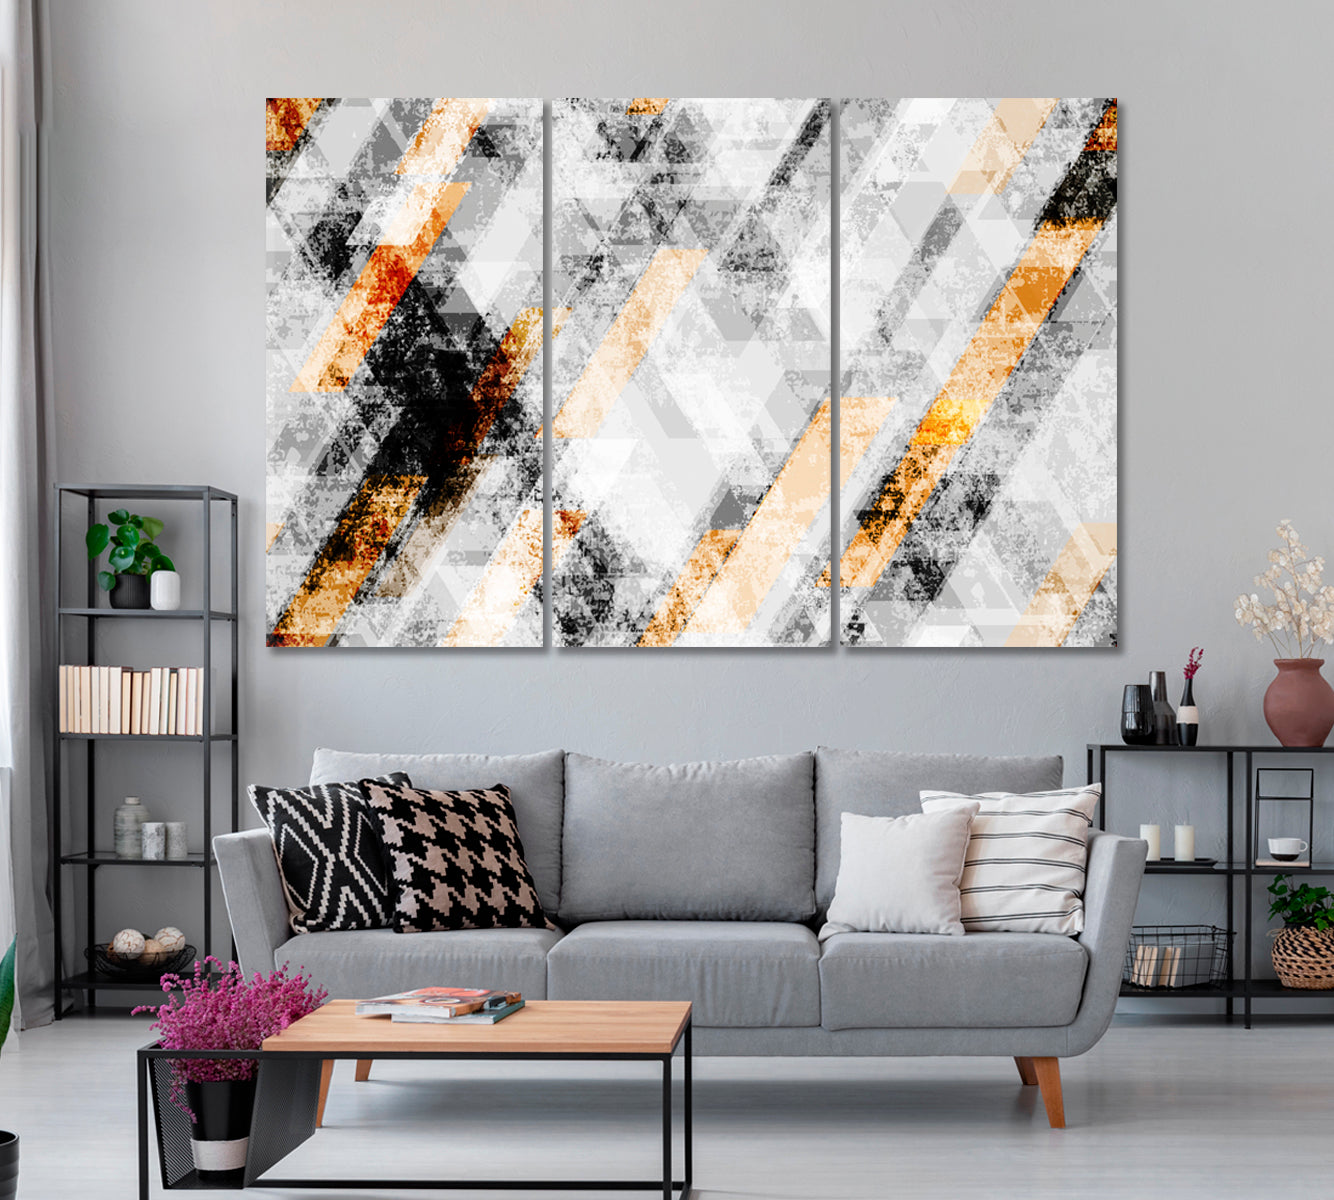 Geometric Abstraction Canvas Print ArtLexy 3 Panels 36"x24" inches 